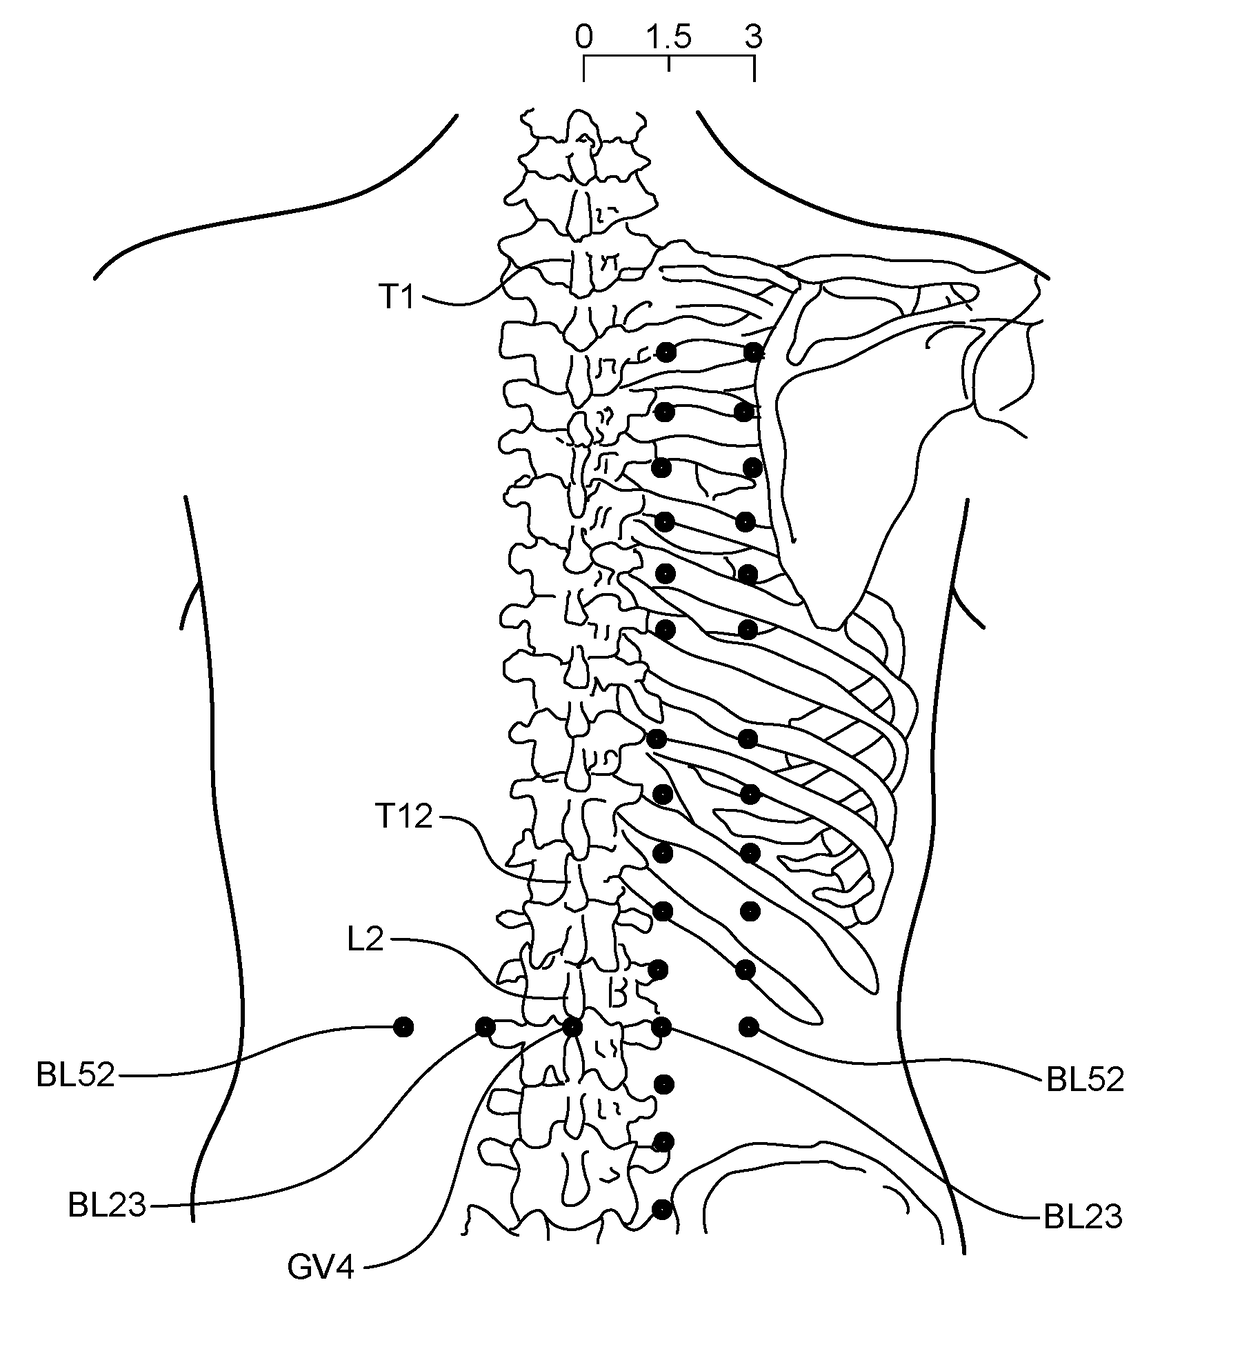 Methods and Systems for Treating a Chronic Low Back Pain Condition Using an Implantable Electroacupuncture Device